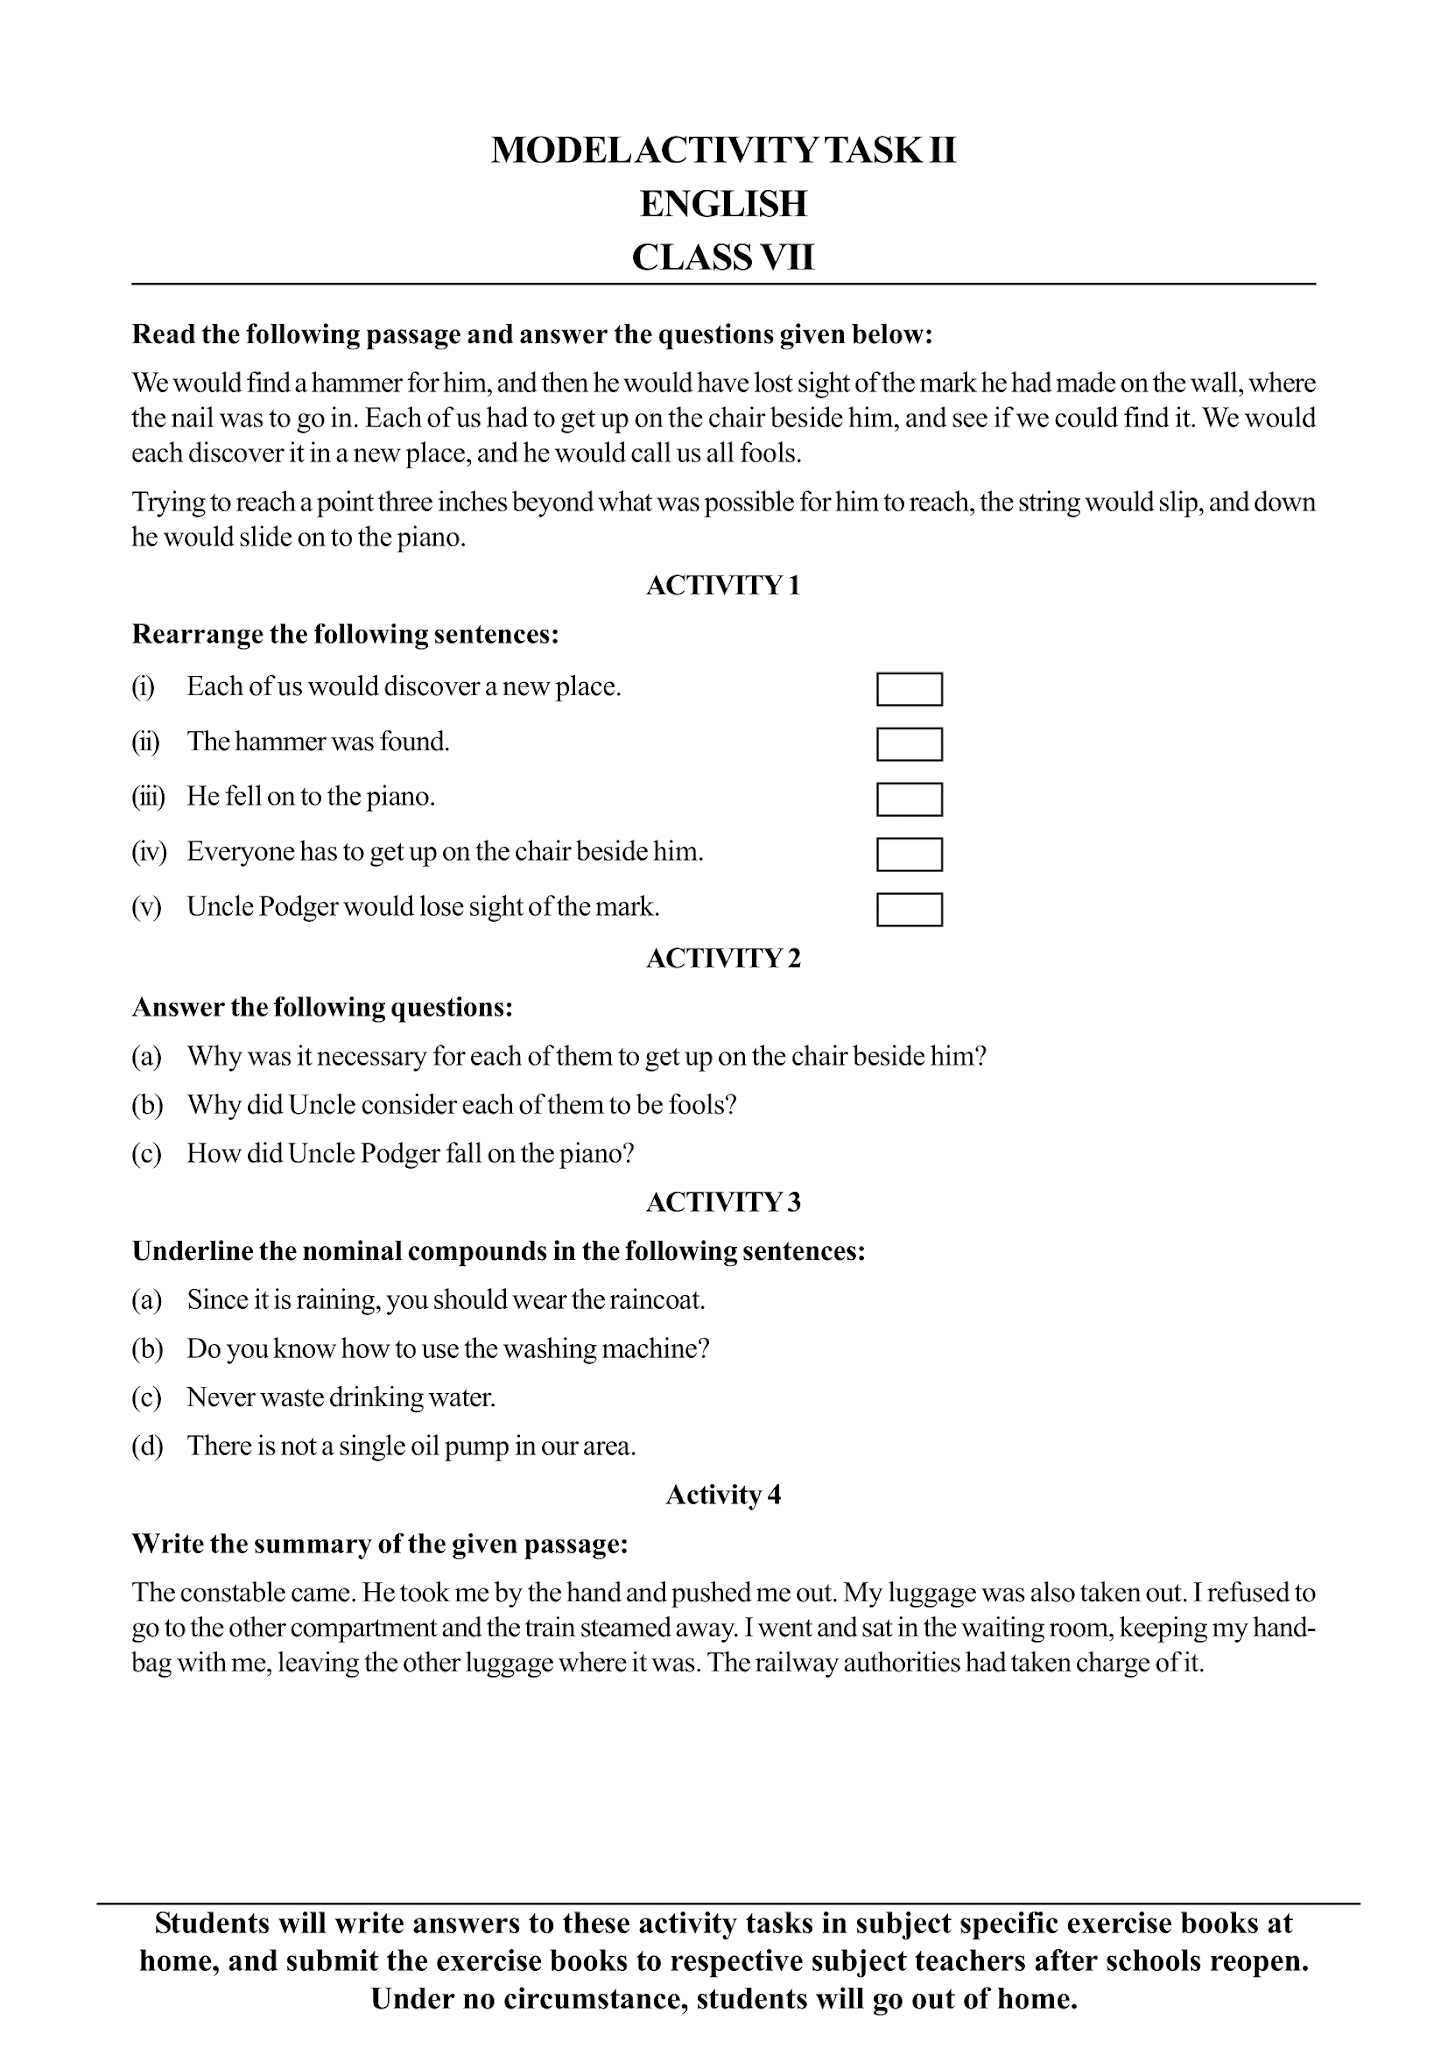 Model Activity Tasks | Second Language (English) | CLASS 7 | Part Two | 2021 | PDF | Question & Answer